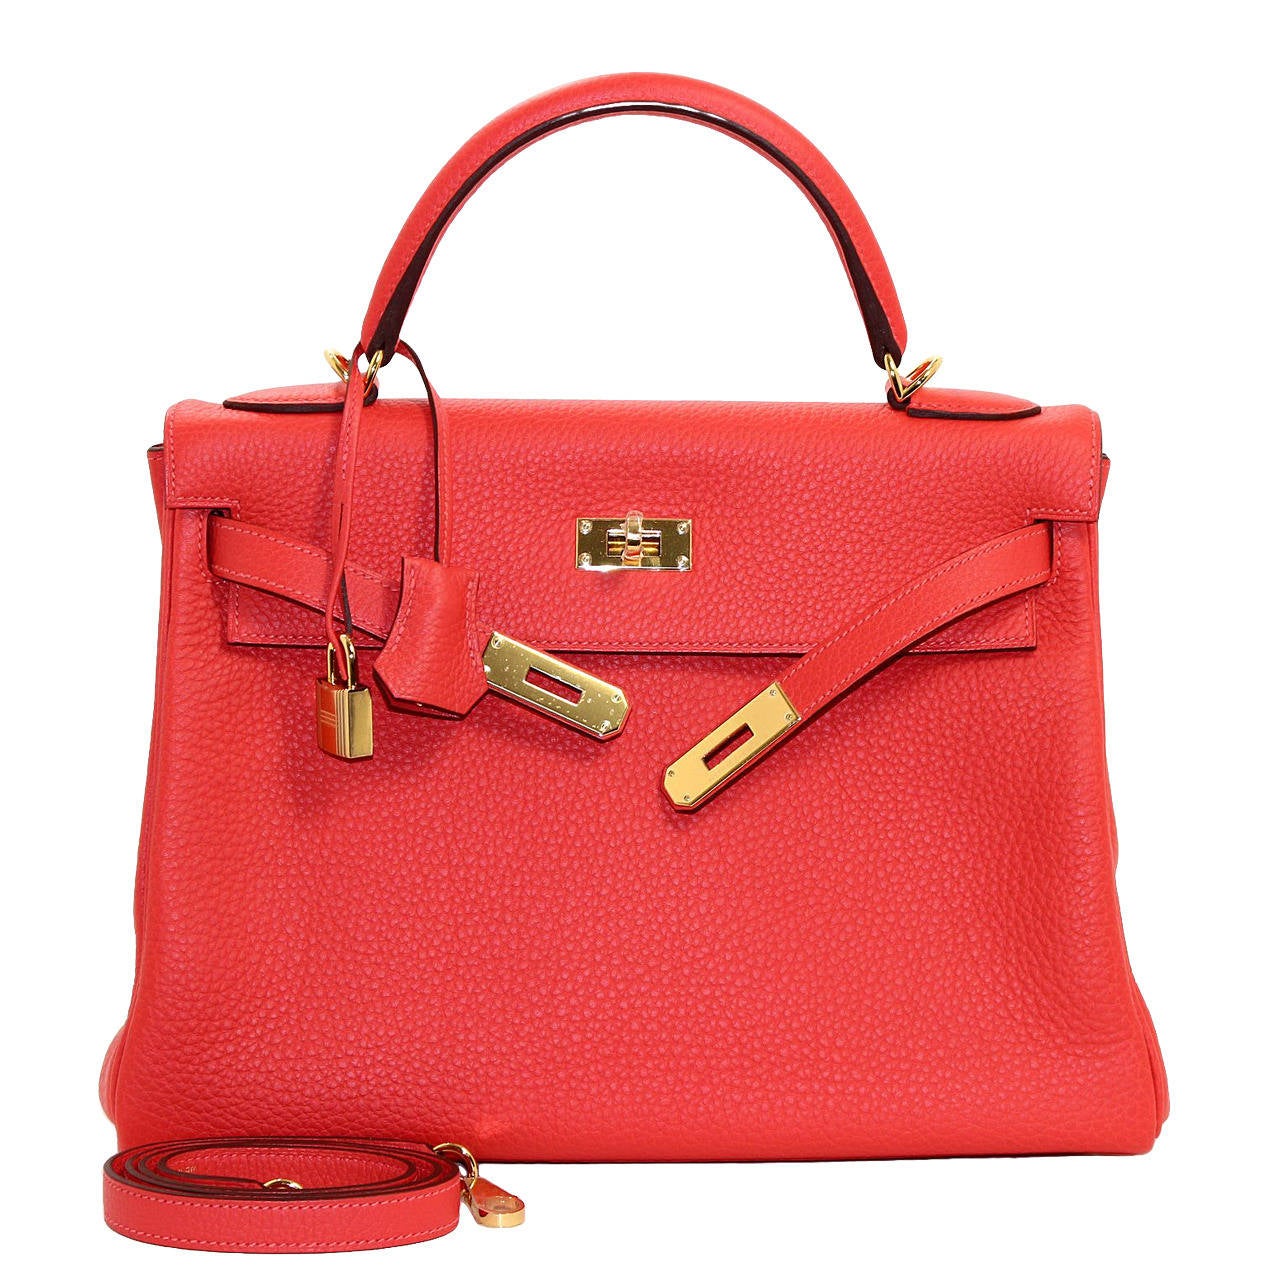 Hermes Kelly Bag in Rouge Pivoine Clemence Red Leather, GHW, 32 cm size